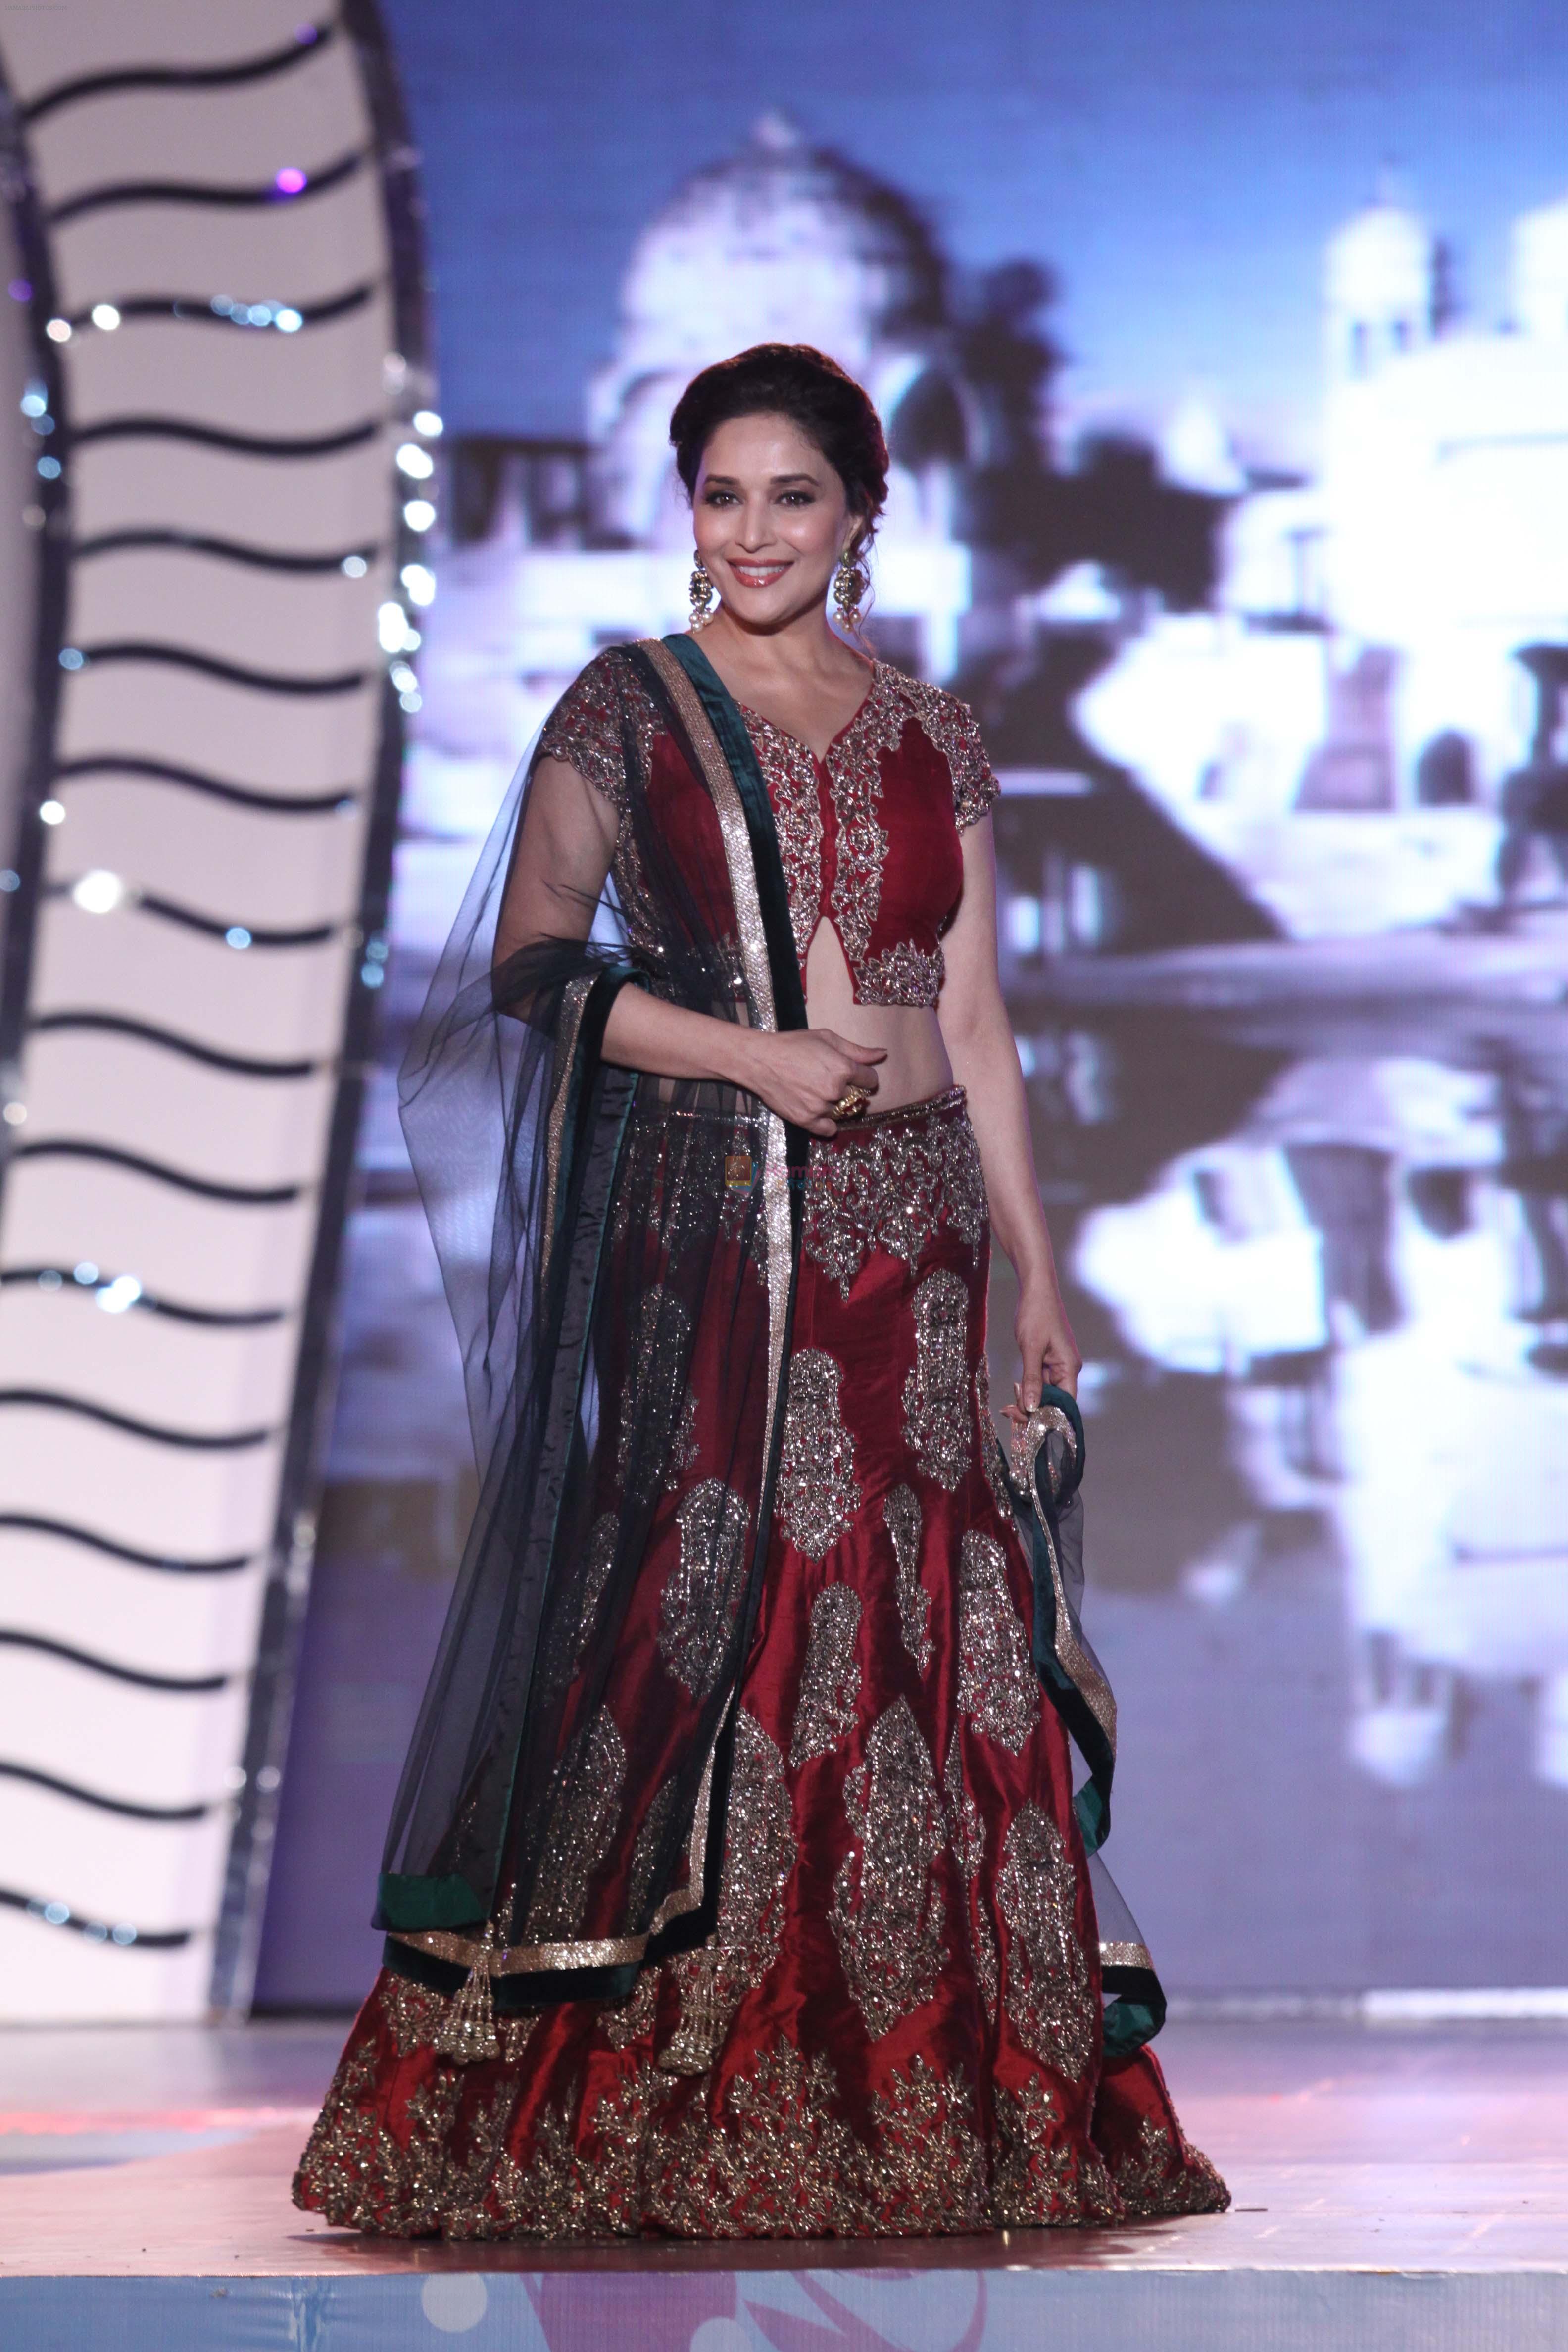 Madhuri Dixit at Manish malhotra show for save n empower the girl child cause by lilavati hospital in Mumbai on 5th Feb 2014